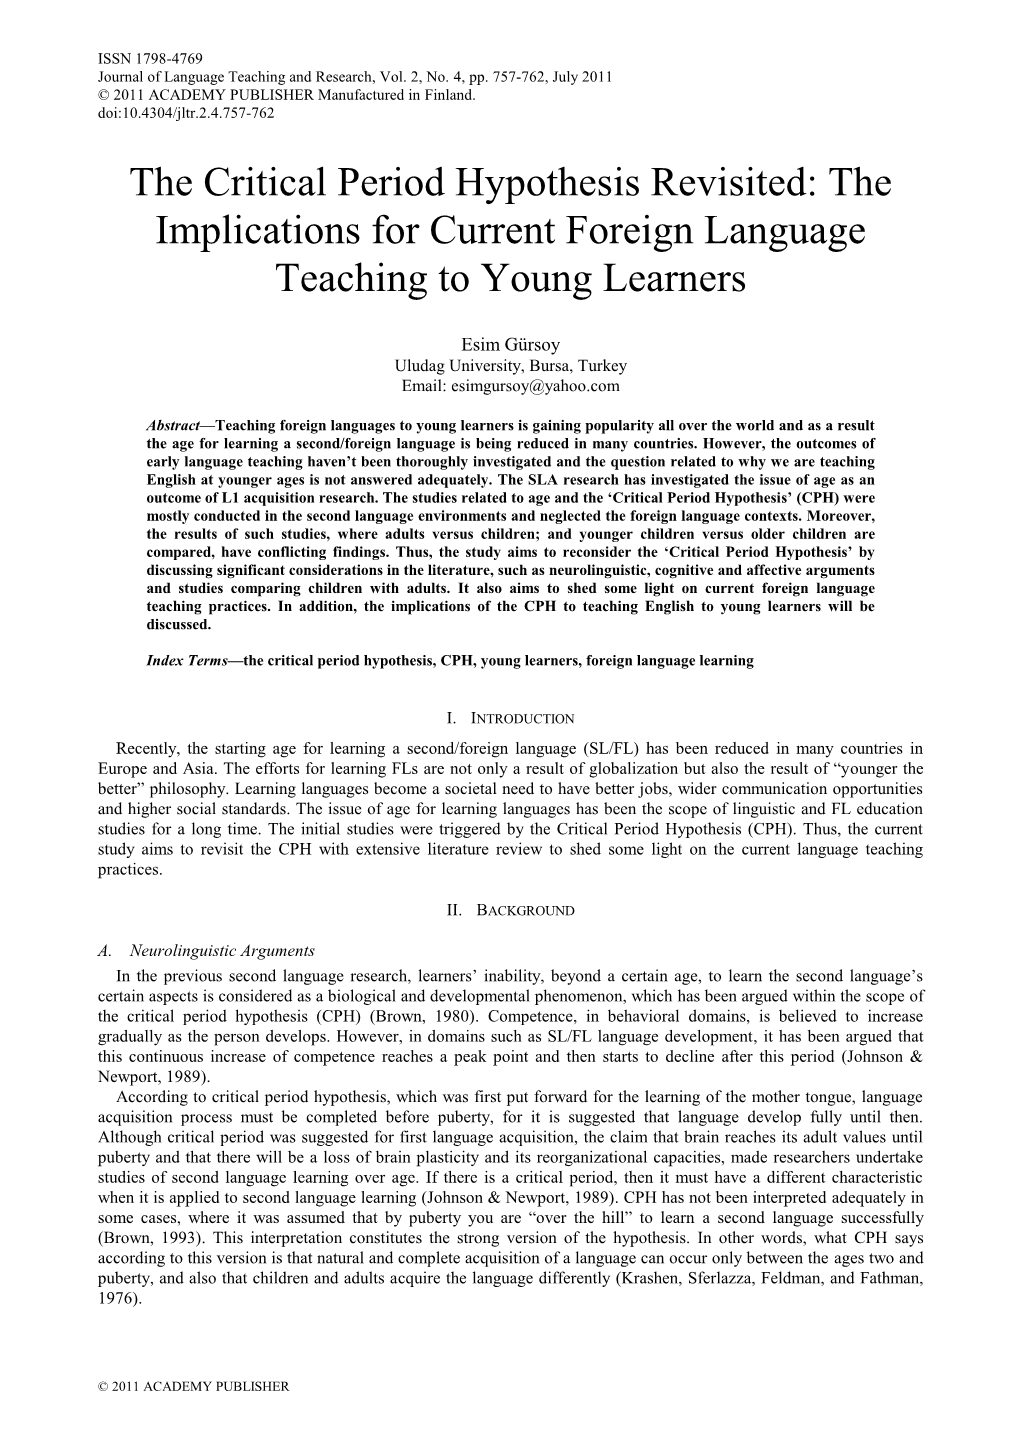 the-critical-period-hypothesis-revisited-the-implications-for-current-foreign-language-teaching